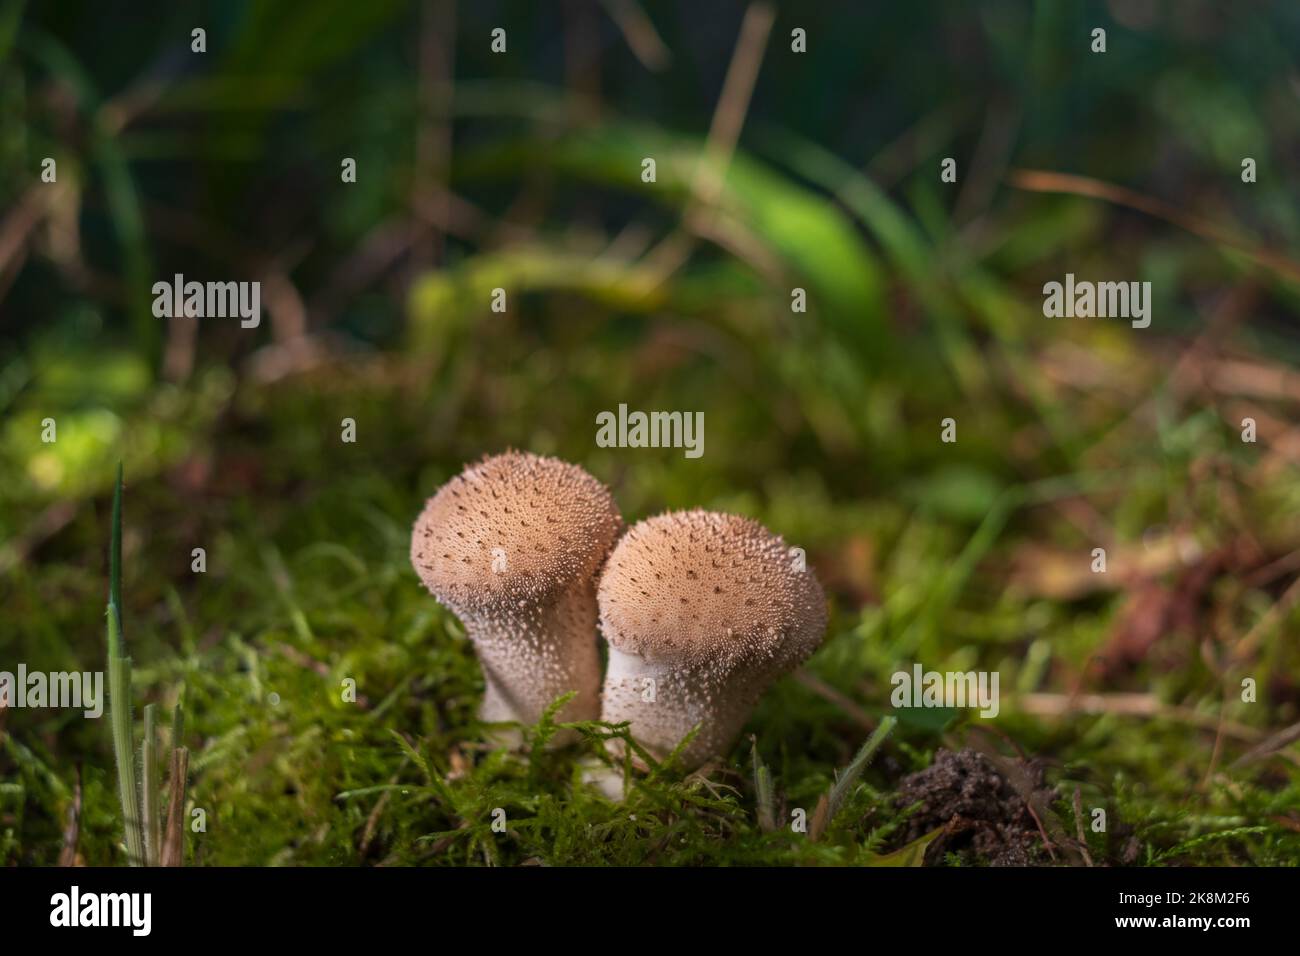 Close-up of a fungus called Common Puffball - Lycoperdon Perlatum, common puffball, warted puffball, gem-studded puffball Stock Photo